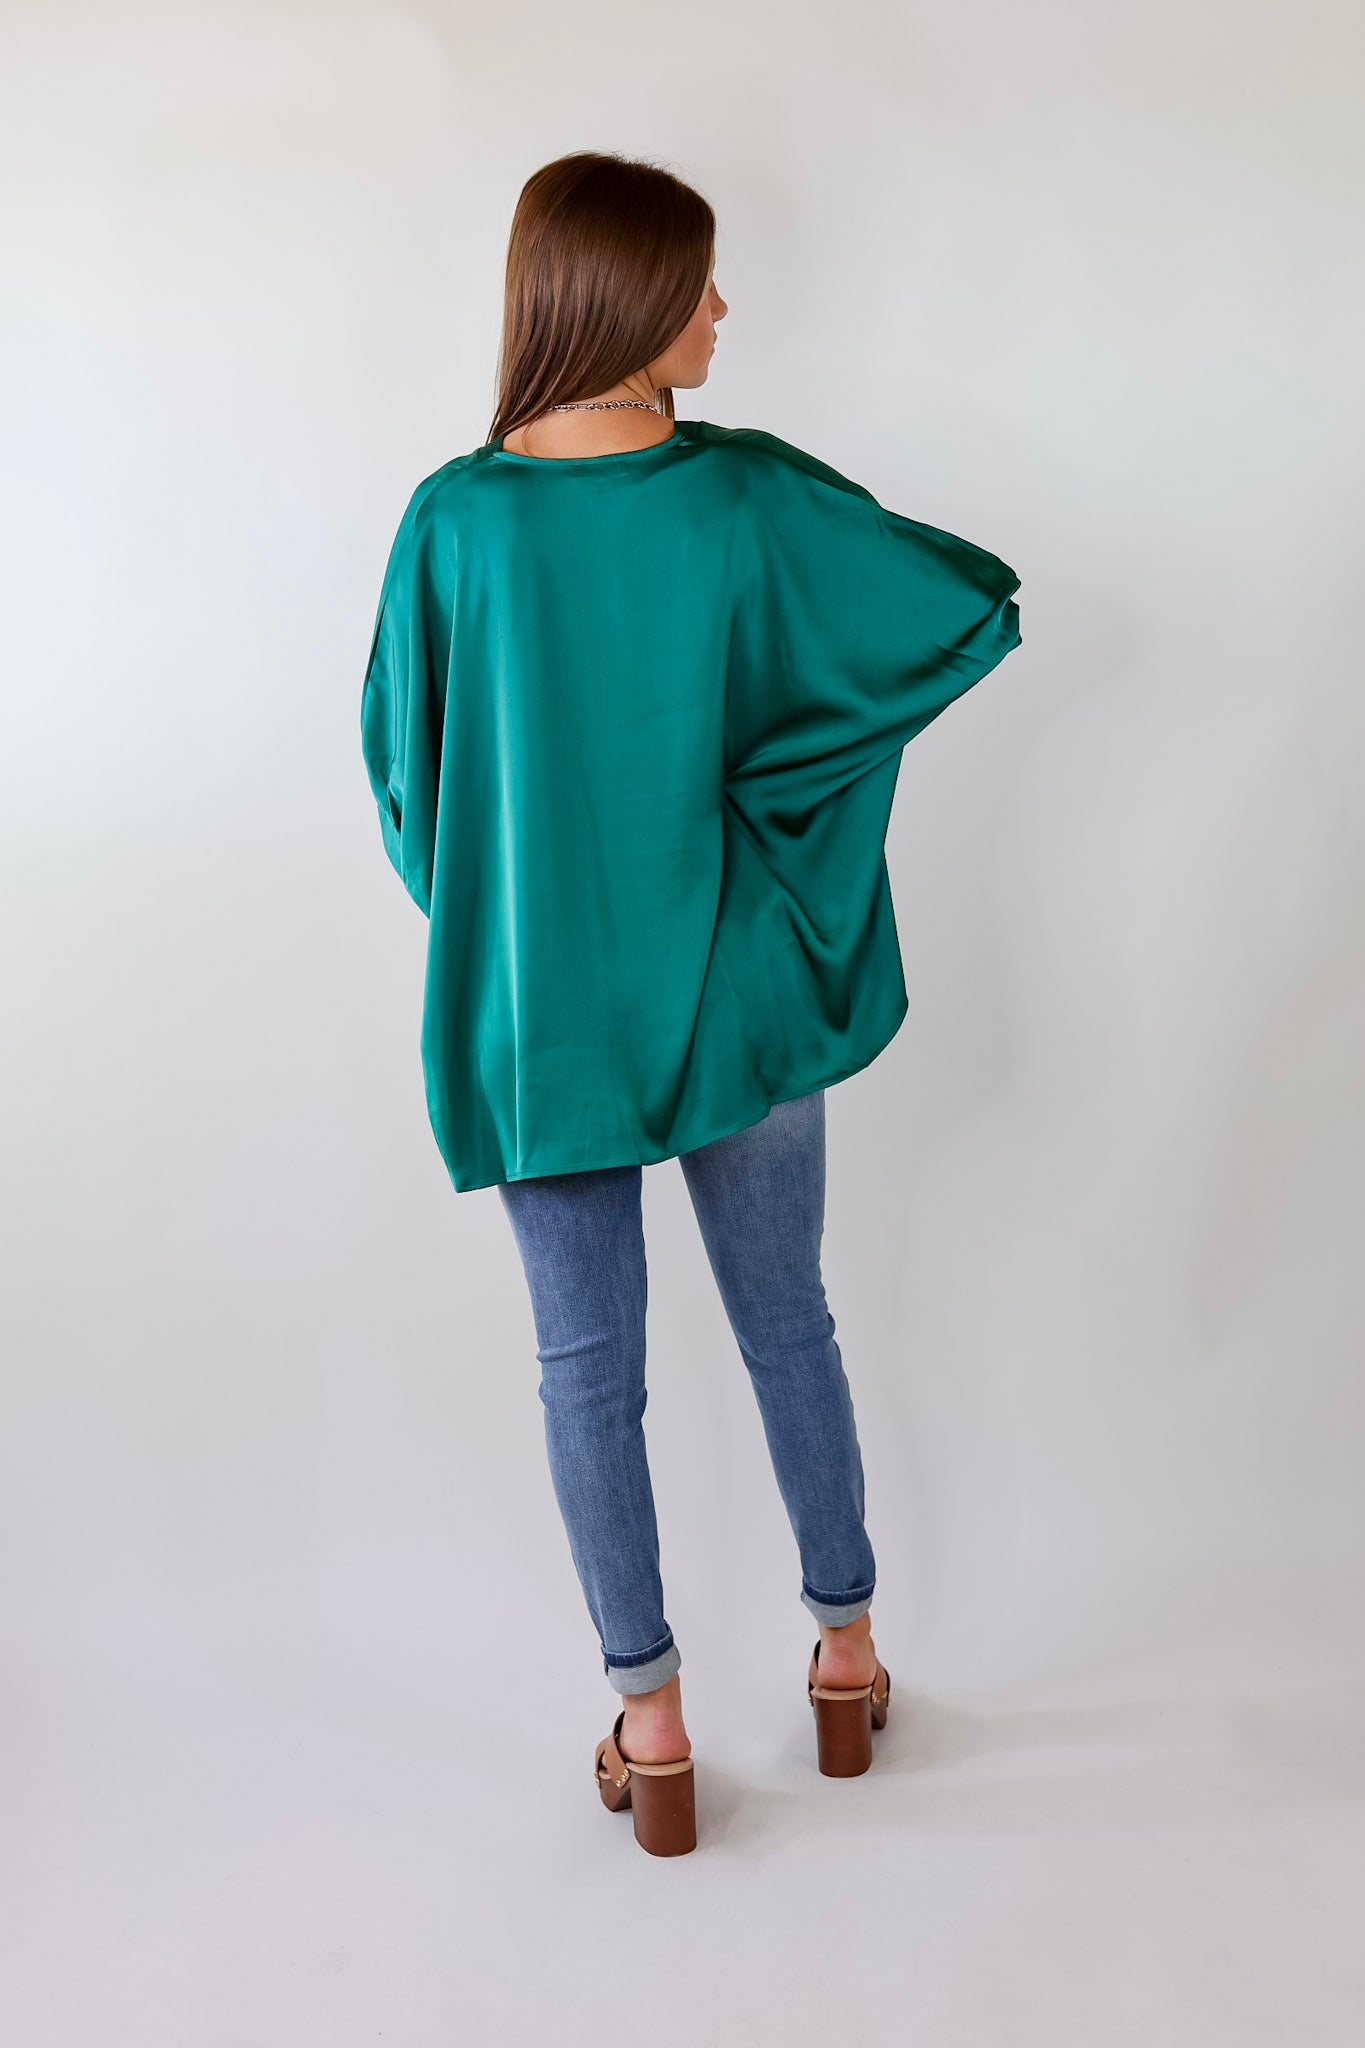 Irresistibly Chic Half Sleeve Oversized Blouse in Hunter Green - Giddy Up Glamour Boutique